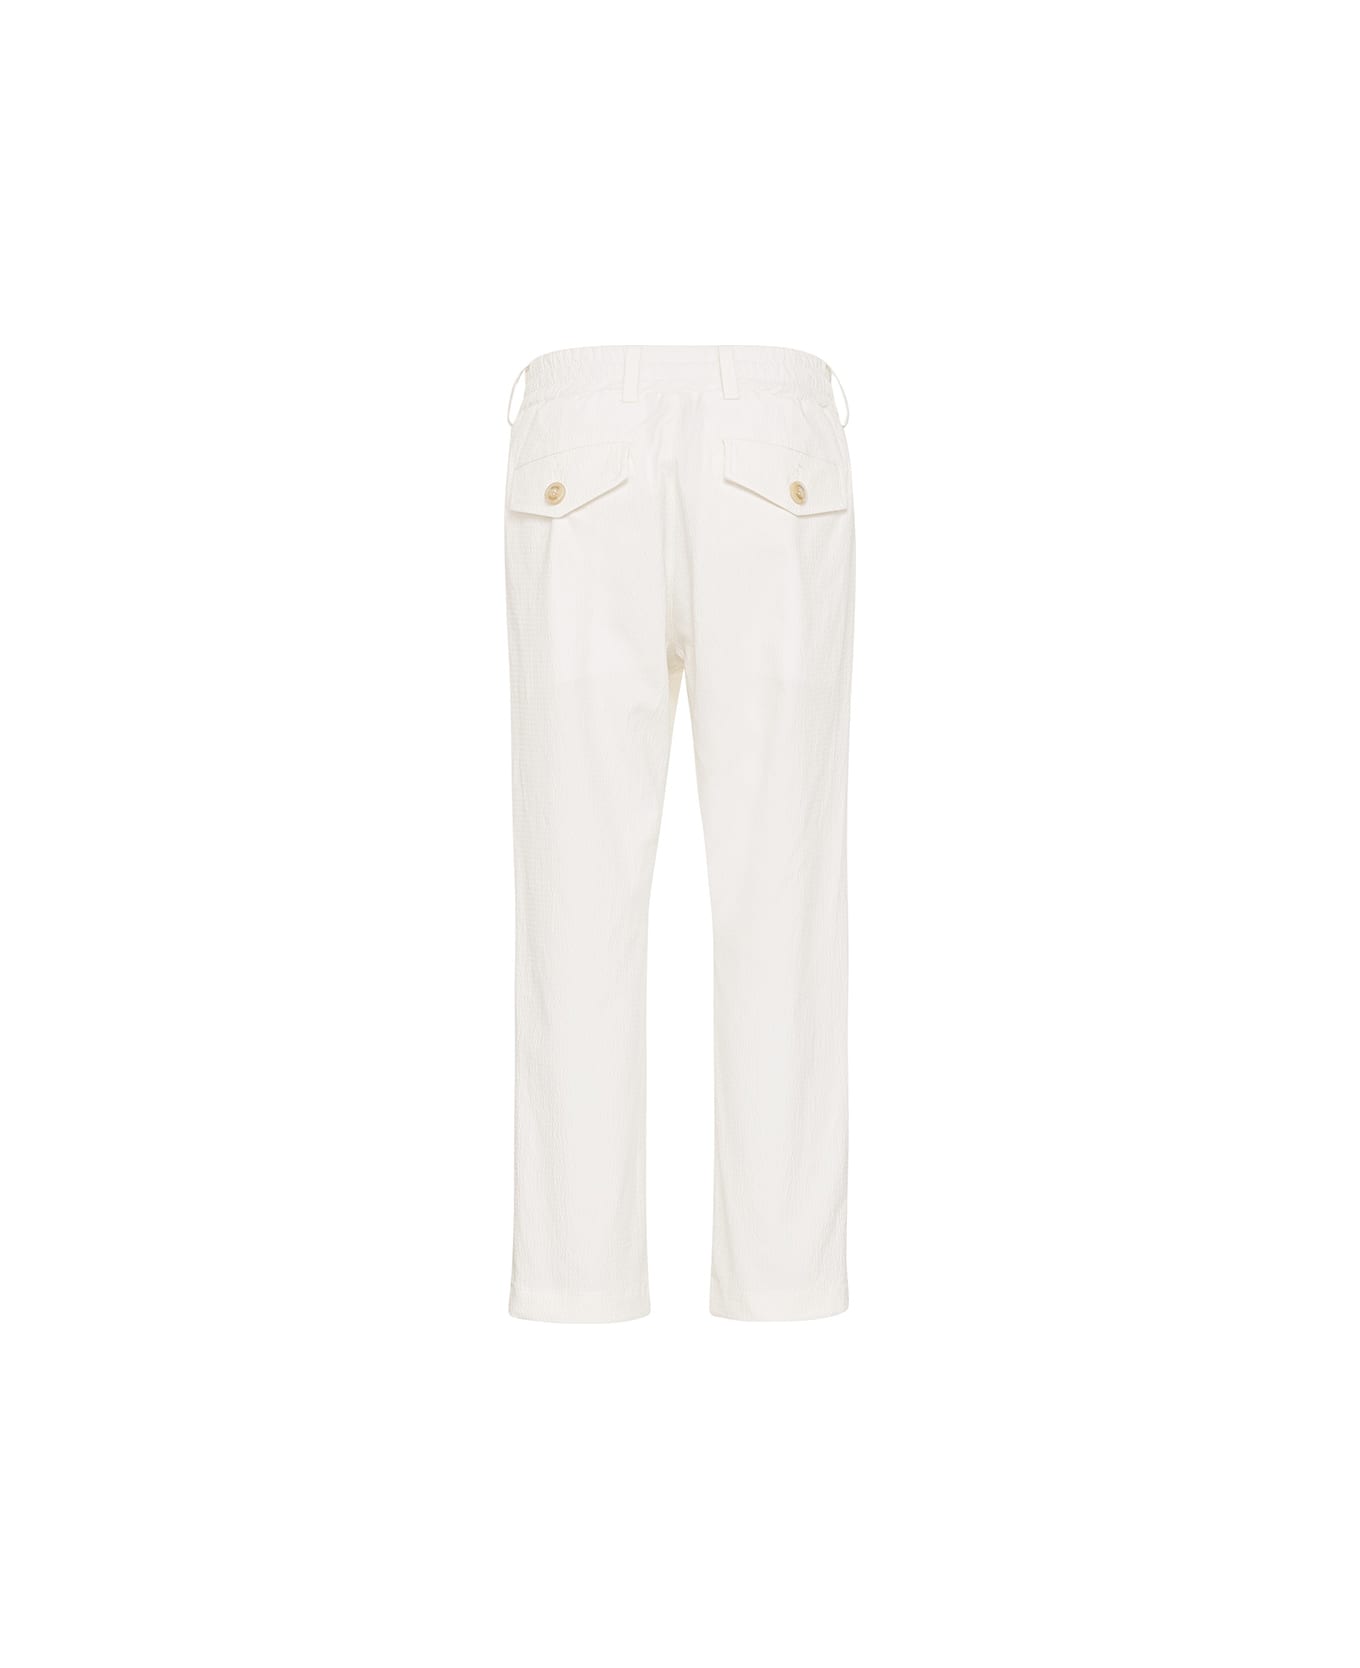 Eleventy White Joggers Pants With Contrasting Drawstring - White ボトムス